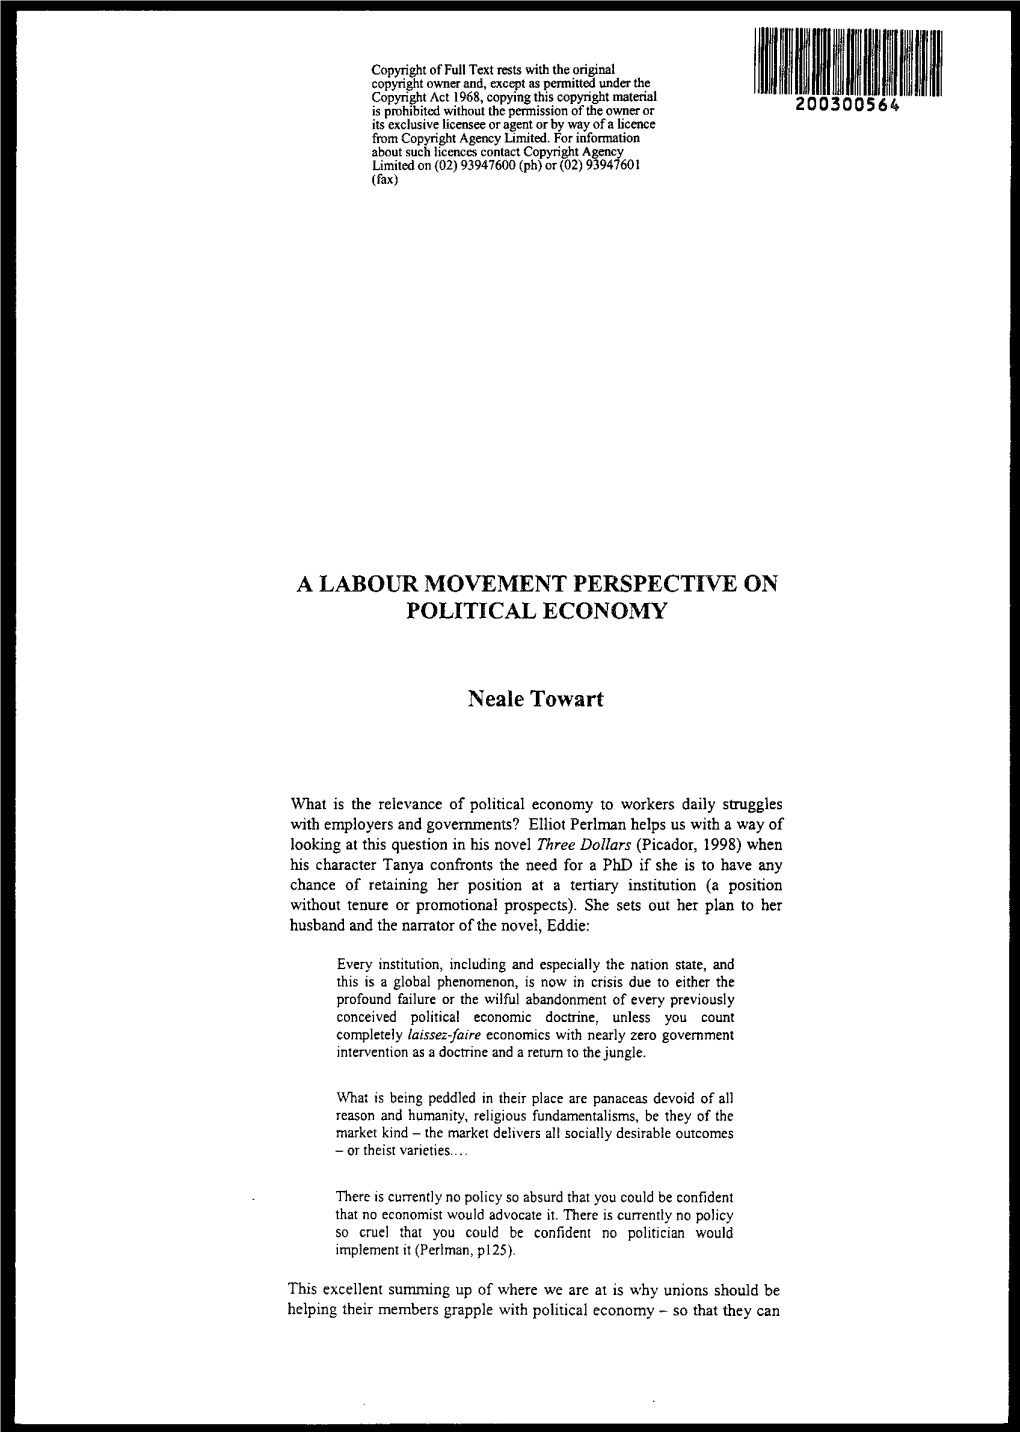 Neale Towart: a Labour Movement Perspective on Political Economy